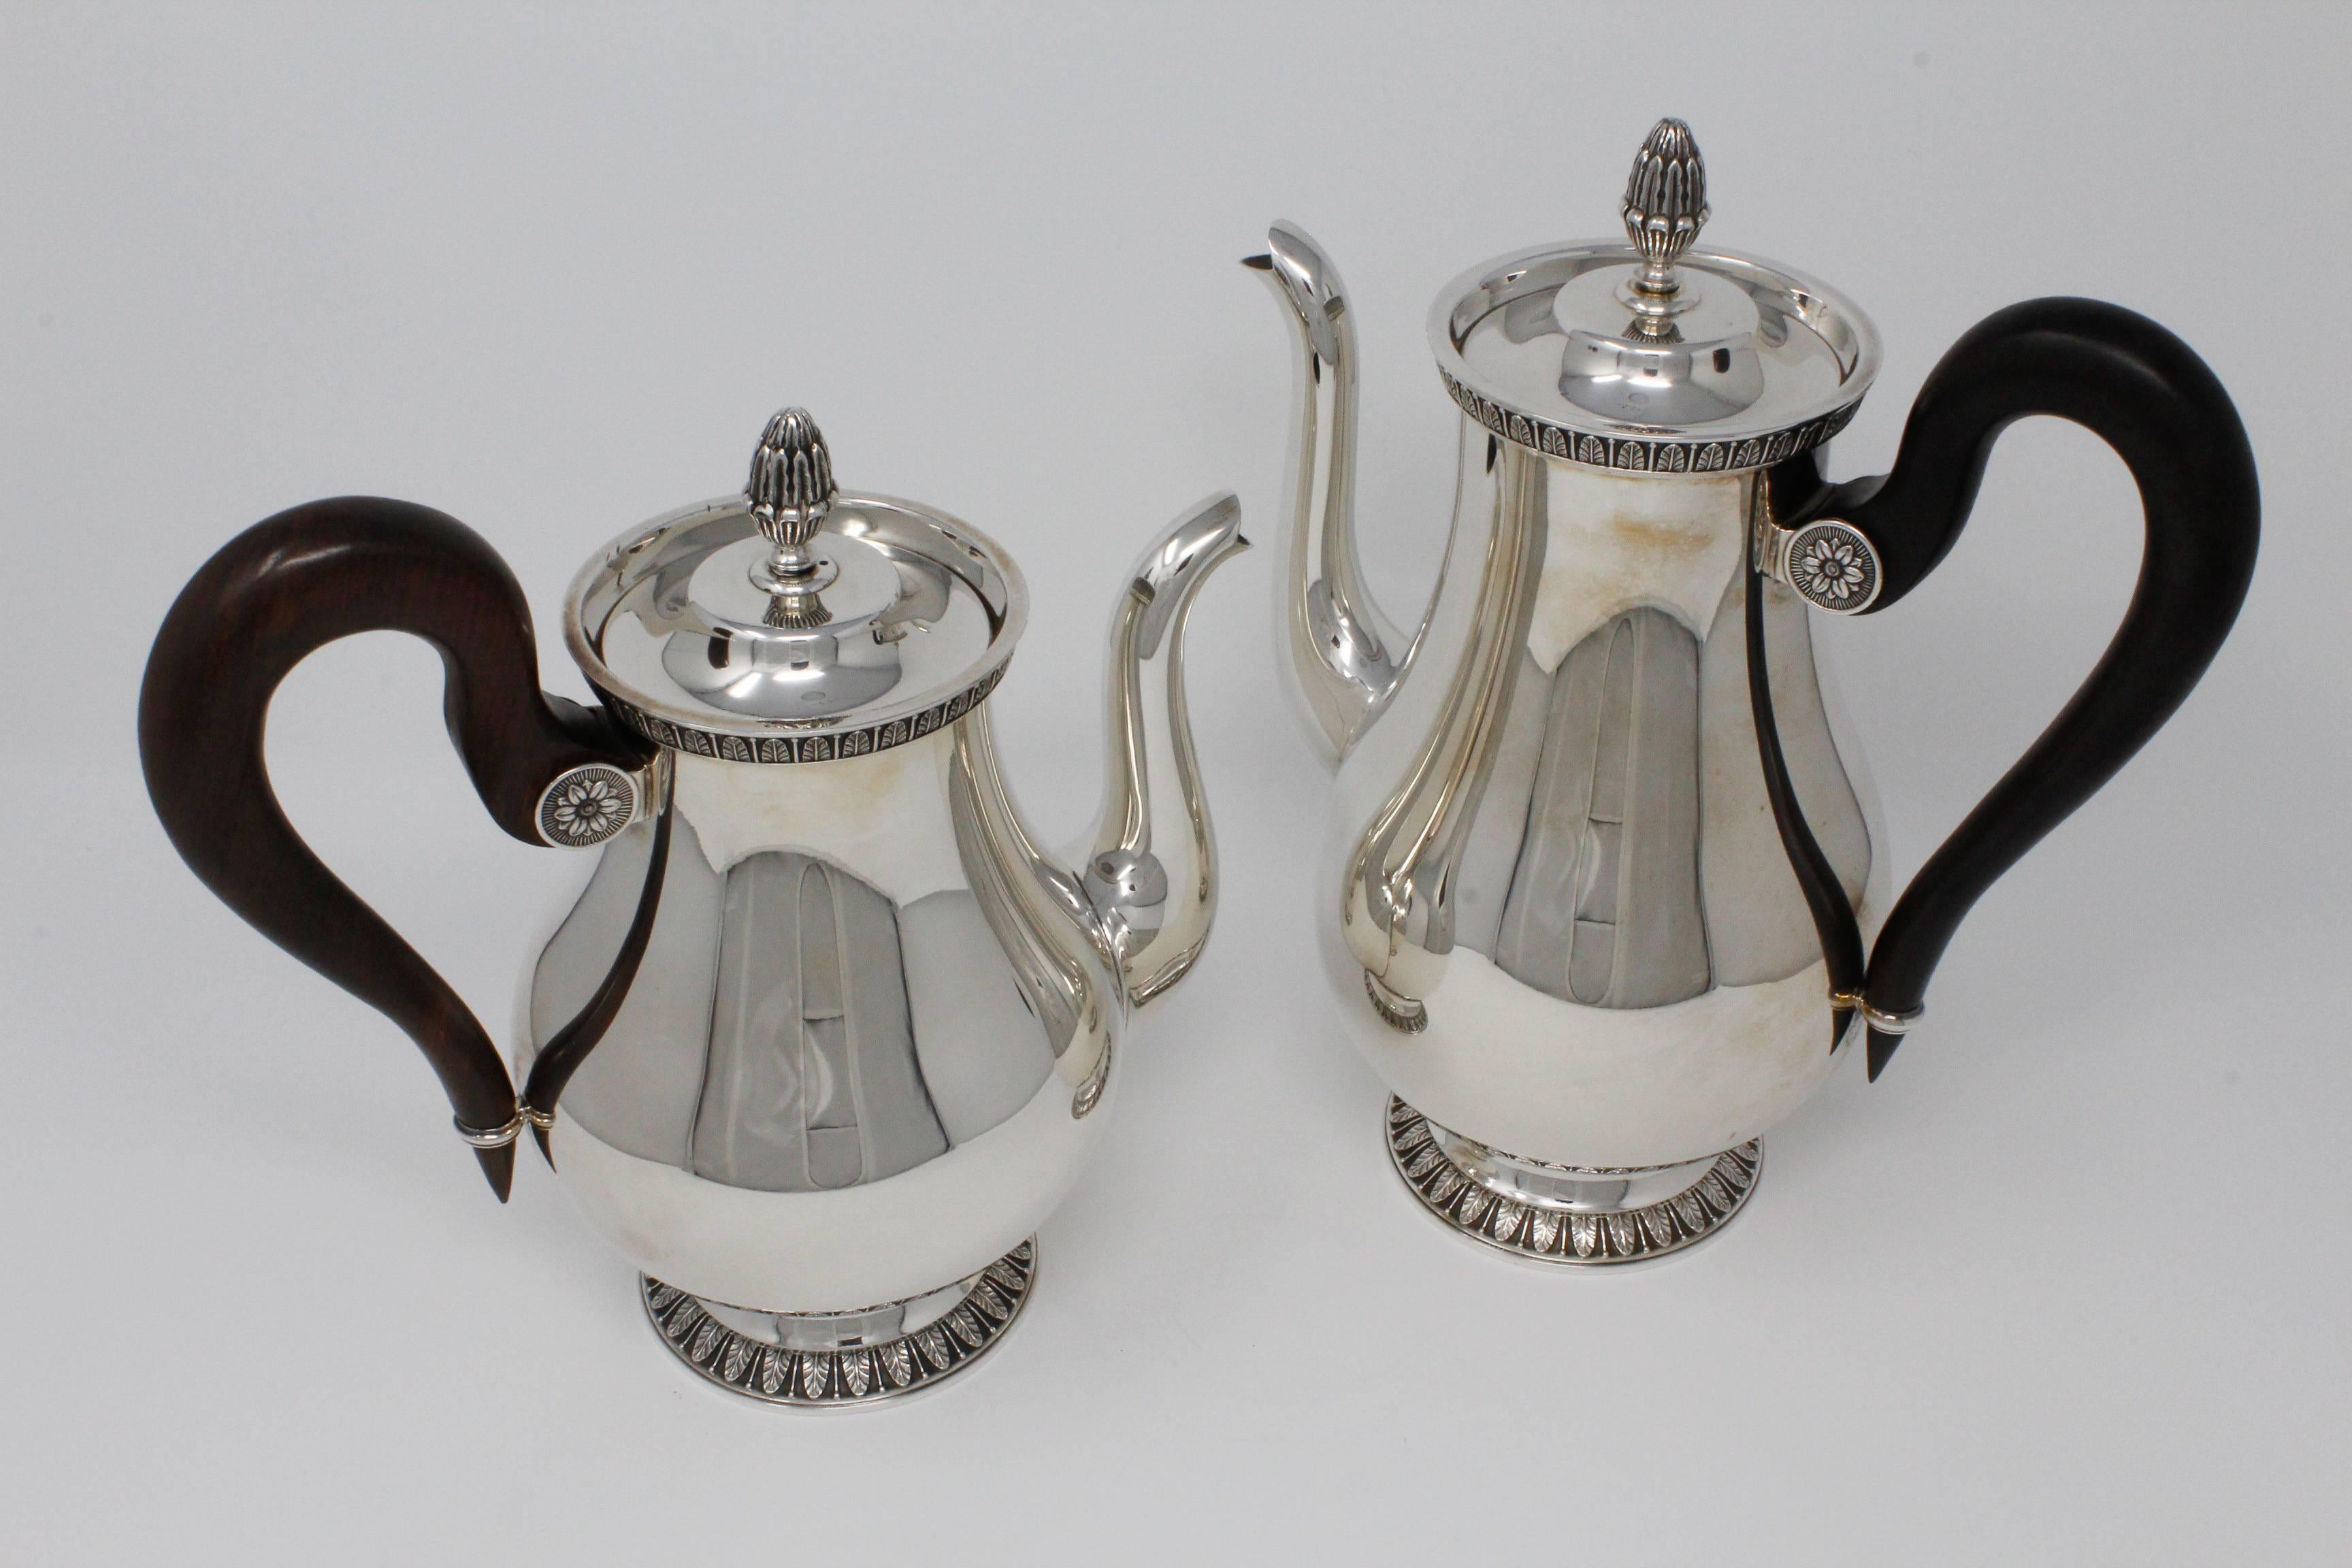 Four-Piece Christofle Tea Set, Silver Plated, Malmaison-Beauharnais Pattern In Excellent Condition For Sale In Santa Fe, NM